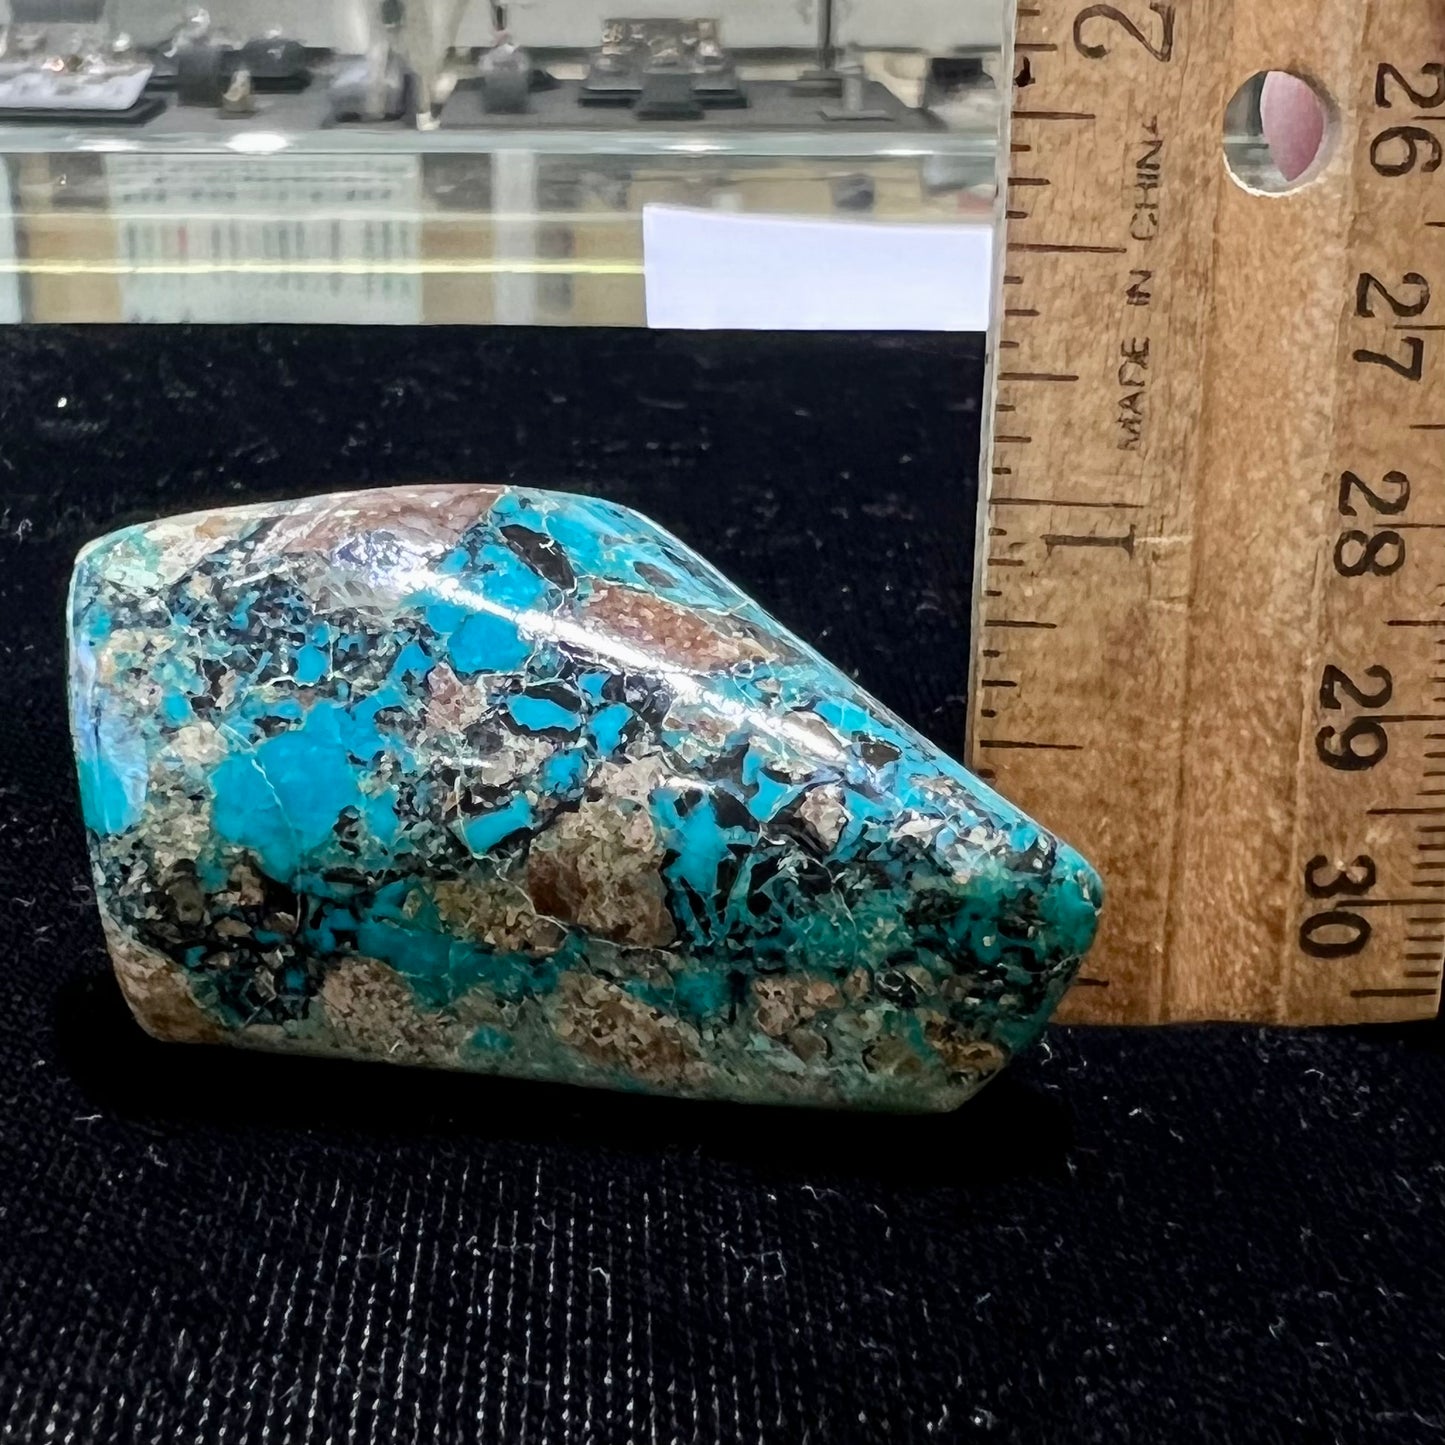 A loose polished chrysocolla stone with malachite inclusions.